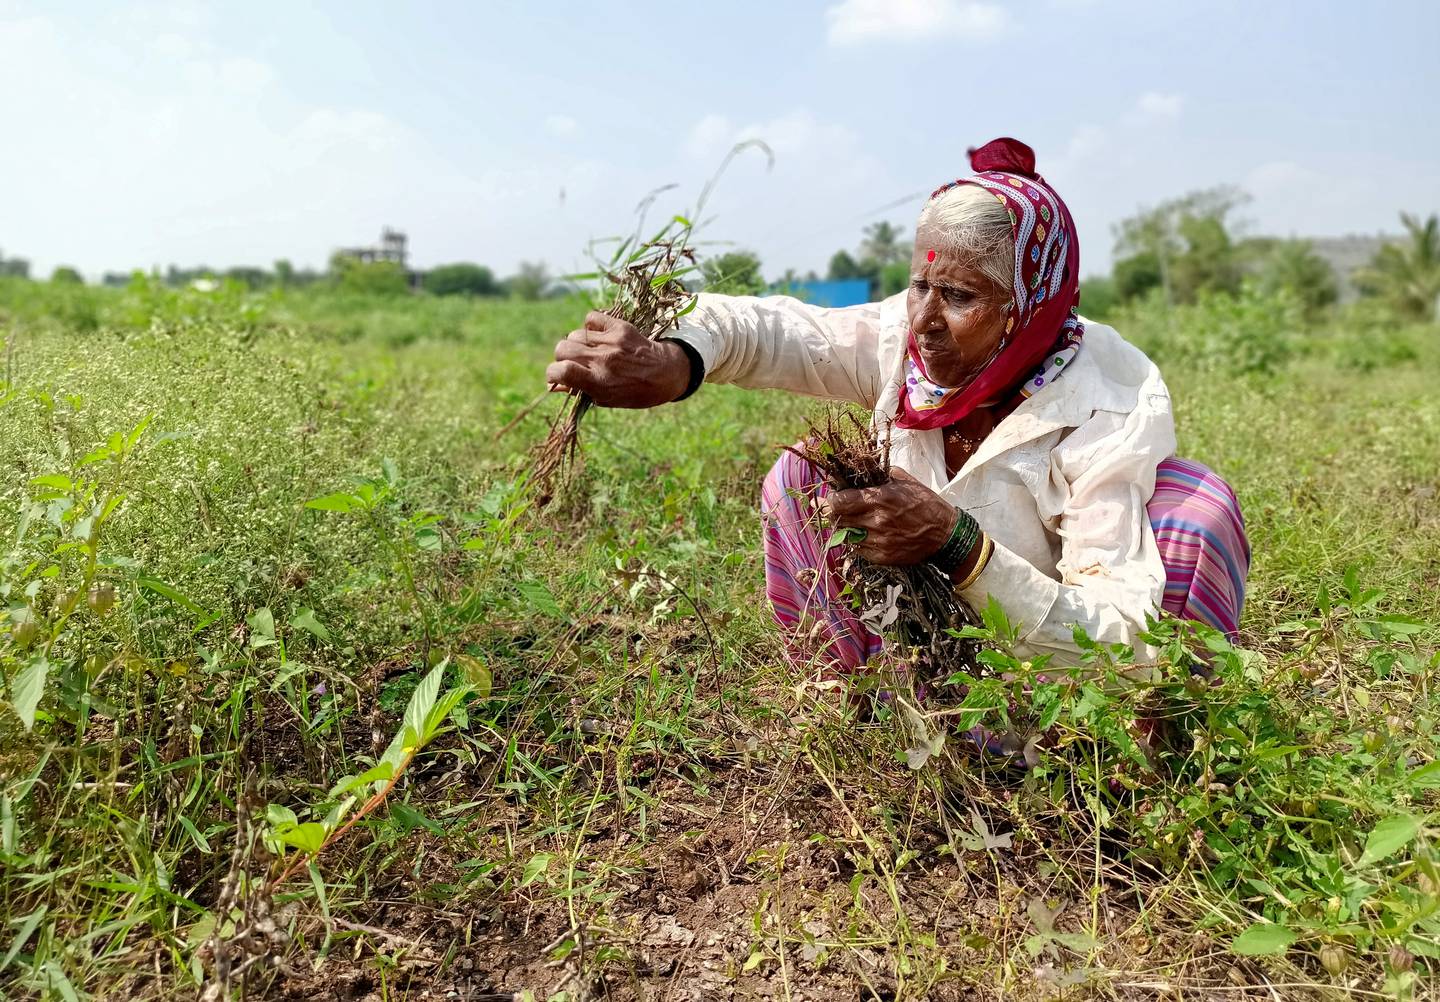 Shantabai Chikhale, a farmer, harvests damaged soybean crops at Kalamb village in Pune district in the western state of Maharashtra, India, on November 11, 2019. Reuters